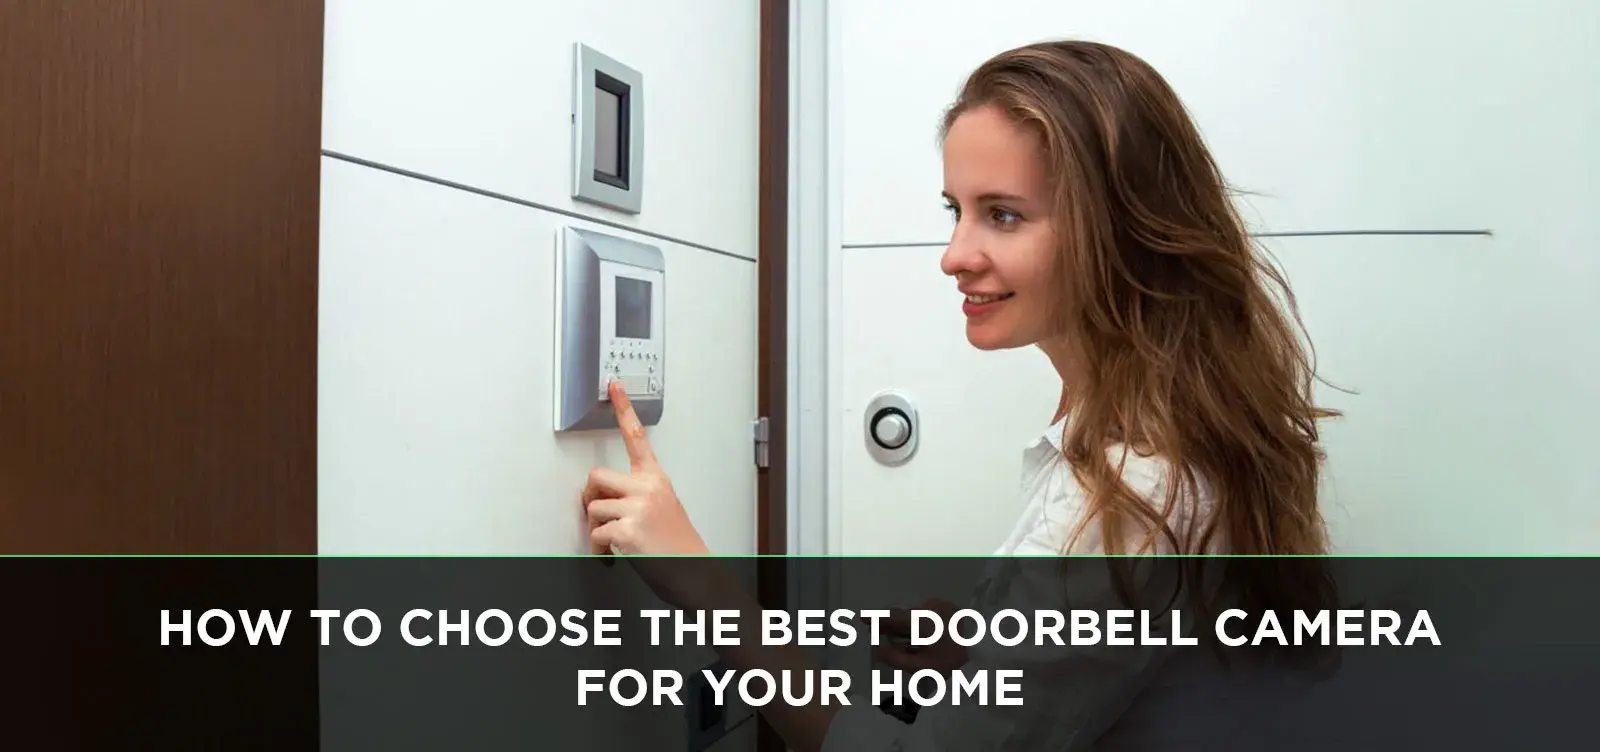 How To Choose The Best Doorbell Camera For Your Home